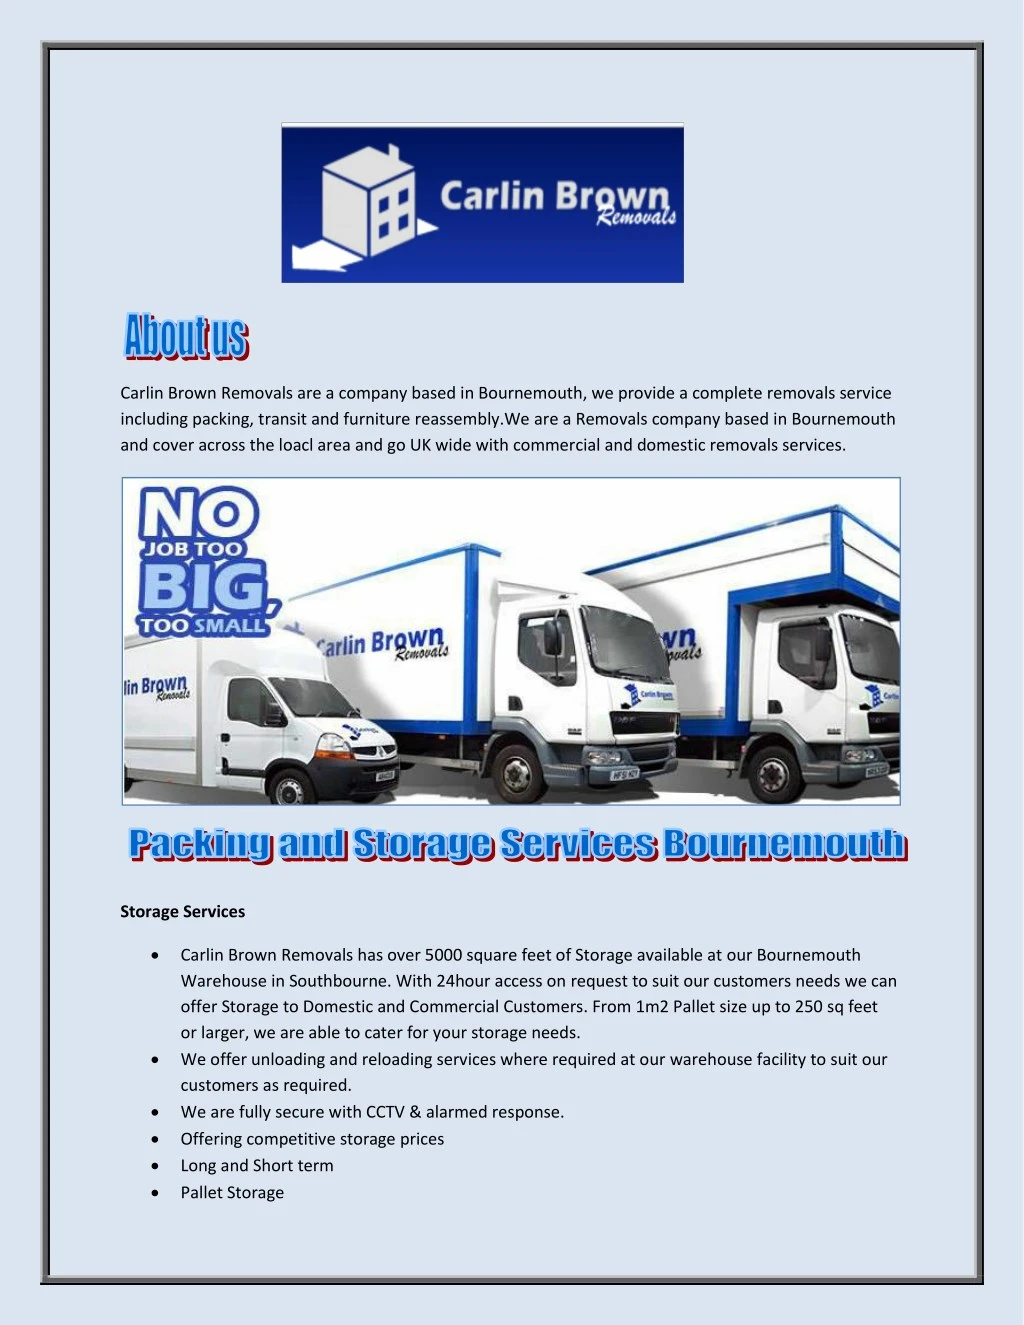 carlin brown removals are a company based